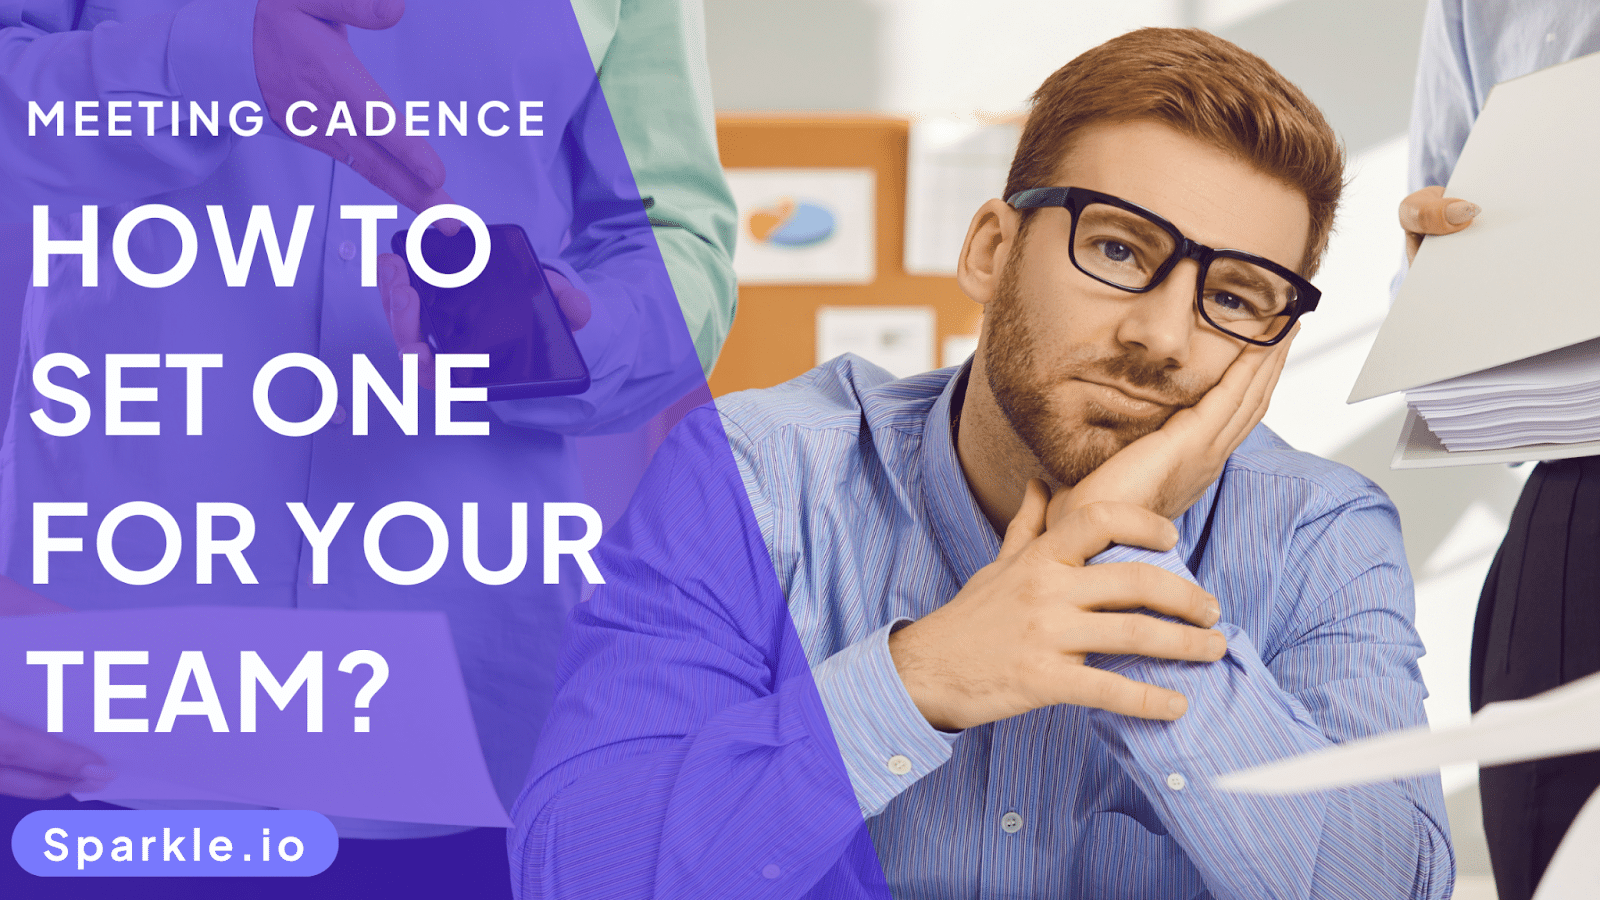 Meeting Cadence: How to Set One for Your Team